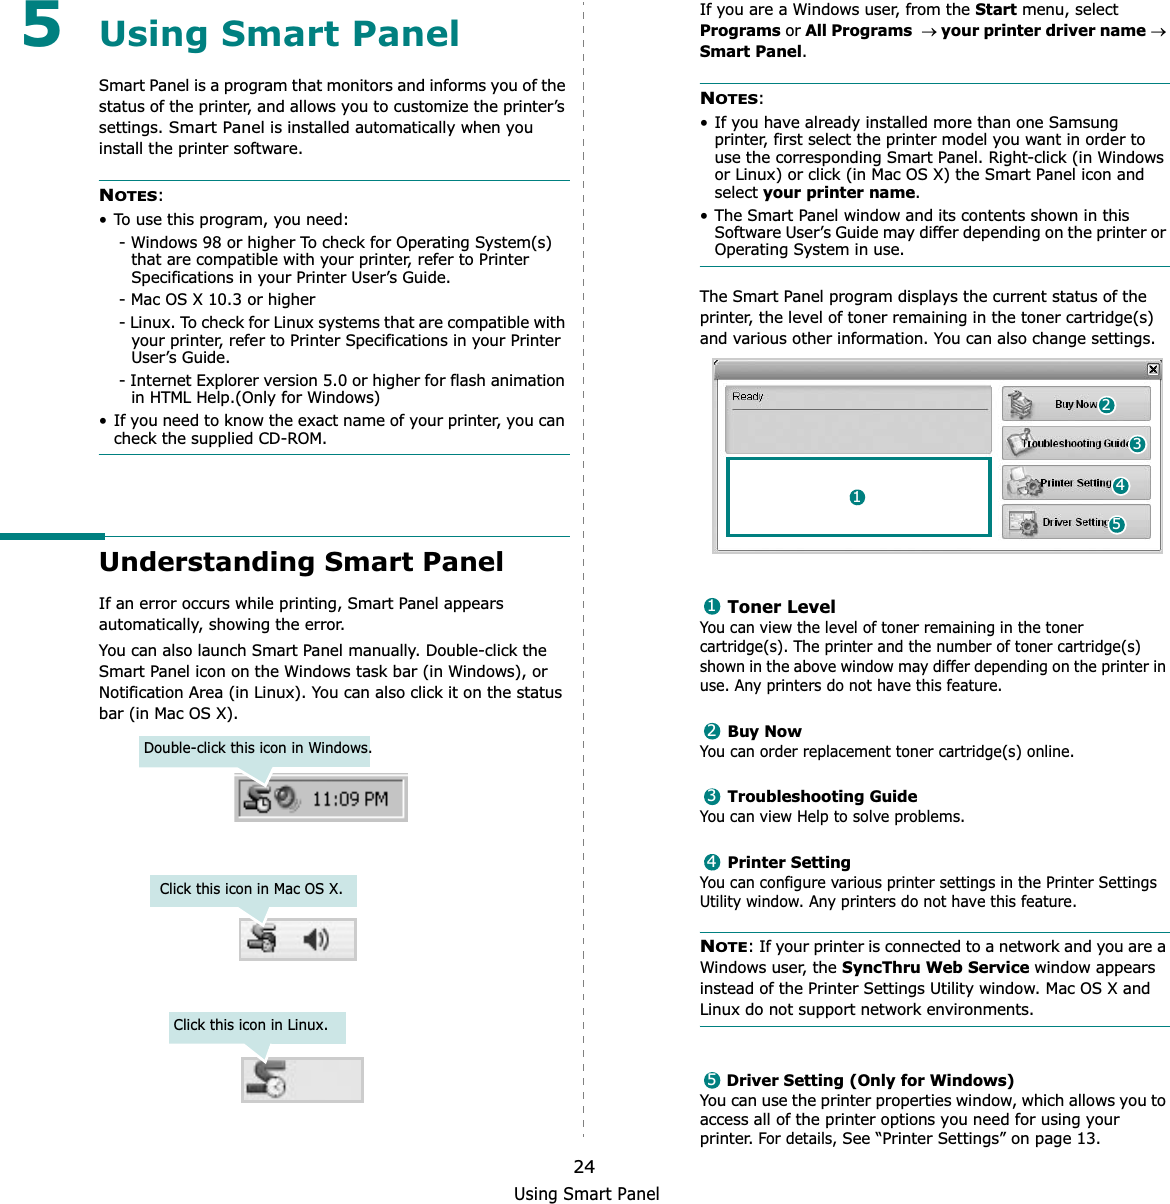 Using Smart Panel245Using Smart PanelSmart Panel is a program that monitors and informs you of the status of the printer, and allows you to customize the printer’s settings. Smart Panel is installed automatically when you install the printer software.NOTES:• To use this program, you need:- Windows 98 or higher To check for Operating System(s) that are compatible with your printer, refer to Printer Specifications in your Printer User’s Guide.- Mac OS X 10.3 or higher- Linux. To check for Linux systems that are compatible with your printer, refer to Printer Specifications in your Printer User’s Guide.- Internet Explorer version 5.0 or higher for flash animation in HTML Help.(Only for Windows)• If you need to know the exact name of your printer, you can check the supplied CD-ROM.Understanding Smart PanelIf an error occurs while printing, Smart Panel appears automatically, showing the error.You can also launch Smart Panel manually. Double-click the Smart Panel icon on the Windows task bar (in Windows), or Notification Area (in Linux). You can also click it on the status bar (in Mac OS X).Double-click this icon in Windows.Click this icon in Mac OS X.Click this icon in Linux.If you are a Windows user, from the Start menu, select Programs or All Programsoyour printer driver nameoSmart Panel.NOTES:• If you have already installed more than one Samsung printer, first select the printer model you want in order to use the corresponding Smart Panel. Right-click (in Windows or Linux) or click (in Mac OS X) the Smart Panel icon and select your printer name.• The Smart Panel window and its contents shown in this Software User’s Guide may differ depending on the printer or Operating System in use.The Smart Panel program displays the current status of the printer, the level of toner remaining in the toner cartridge(s) and various other information. You can also change settings.Toner LevelYou can view the level of toner remaining in the toner cartridge(s). The printer and the number of toner cartridge(s) shown in the above window may differ depending on the printer in use. Any printers do not have this feature.Buy NowYou can order replacement toner cartridge(s) online.Troubleshooting GuideYou can view Help to solve problems.Printer SettingYou can configure various printer settings in the Printer Settings Utility window. Any printers do not have this feature.NOTE: If your printer is connected to a network and you are a Windows user, the SyncThru Web Service window appears instead of the Printer Settings Utility window. Mac OS X and Linux do not support network environments.Driver Setting (Only for Windows)You can use the printer properties window, which allows you to access all of the printer options you need for using your printer. For details, See “Printer Settings” on page 13.2415312345